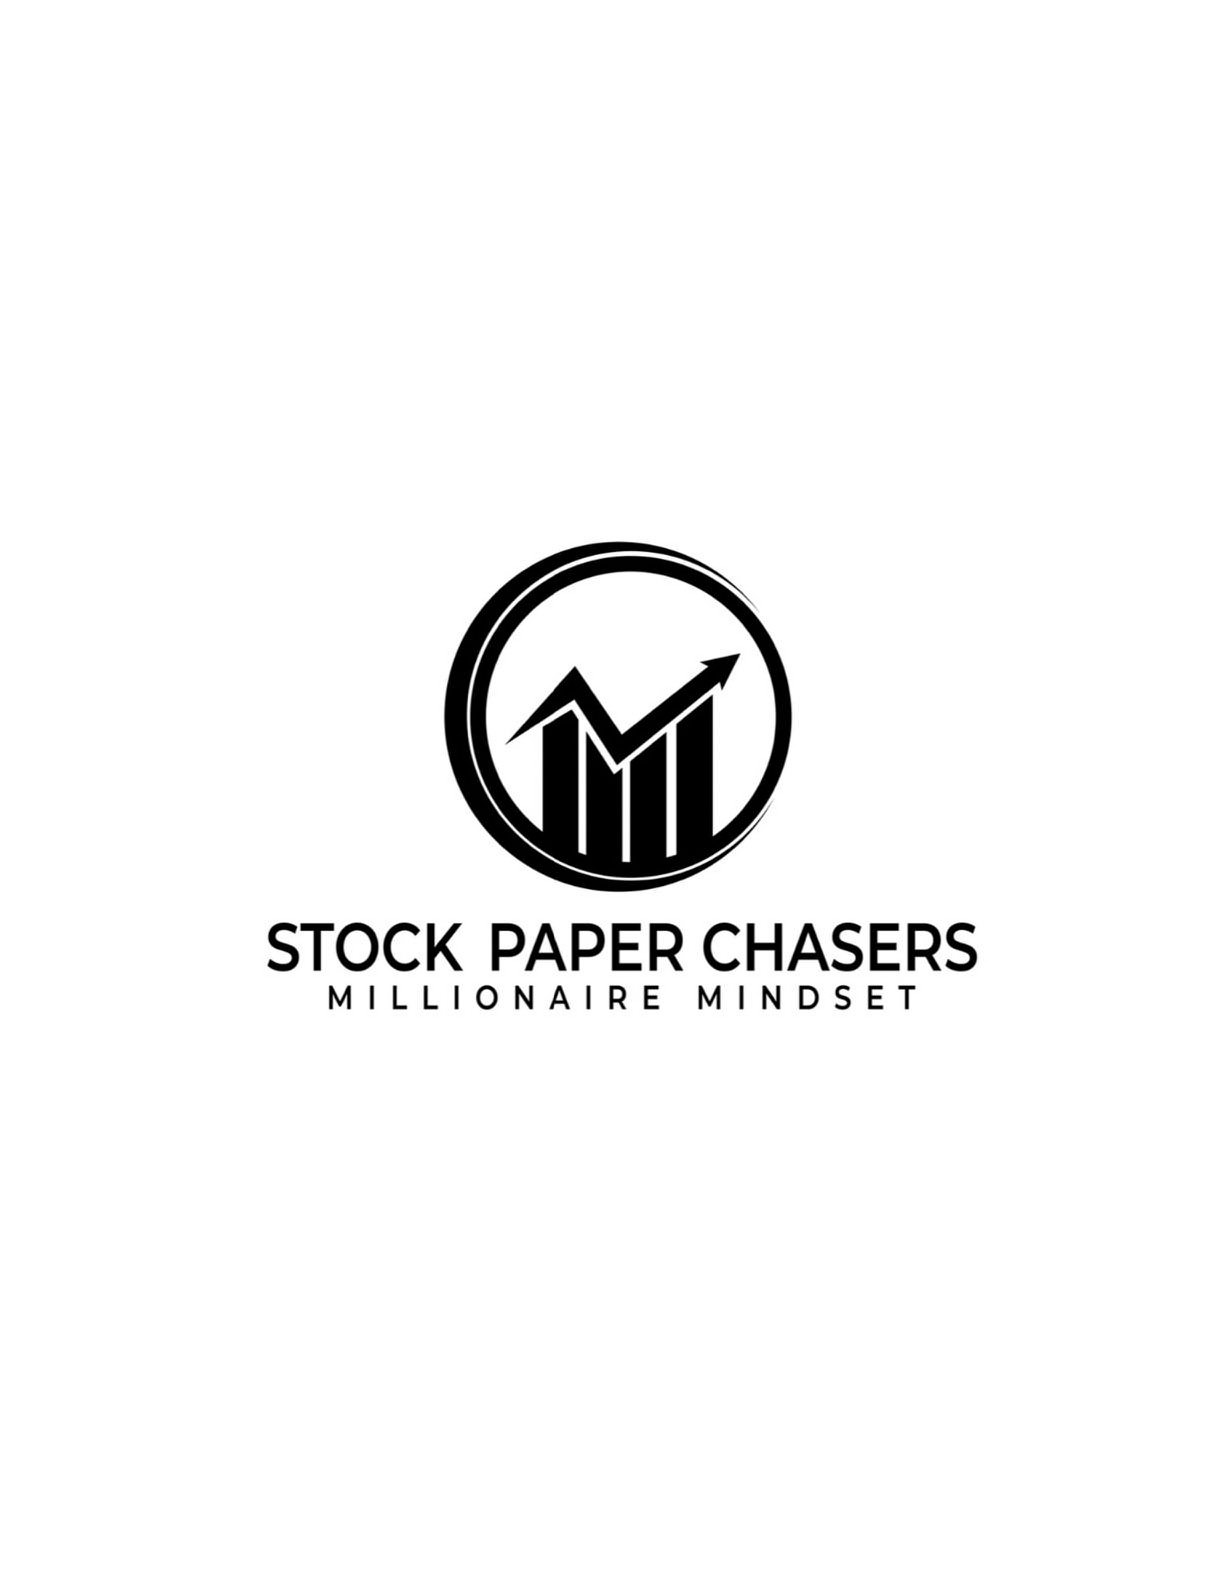  STOCK PAPER CHASERS MILLIONAIRE MINDSET